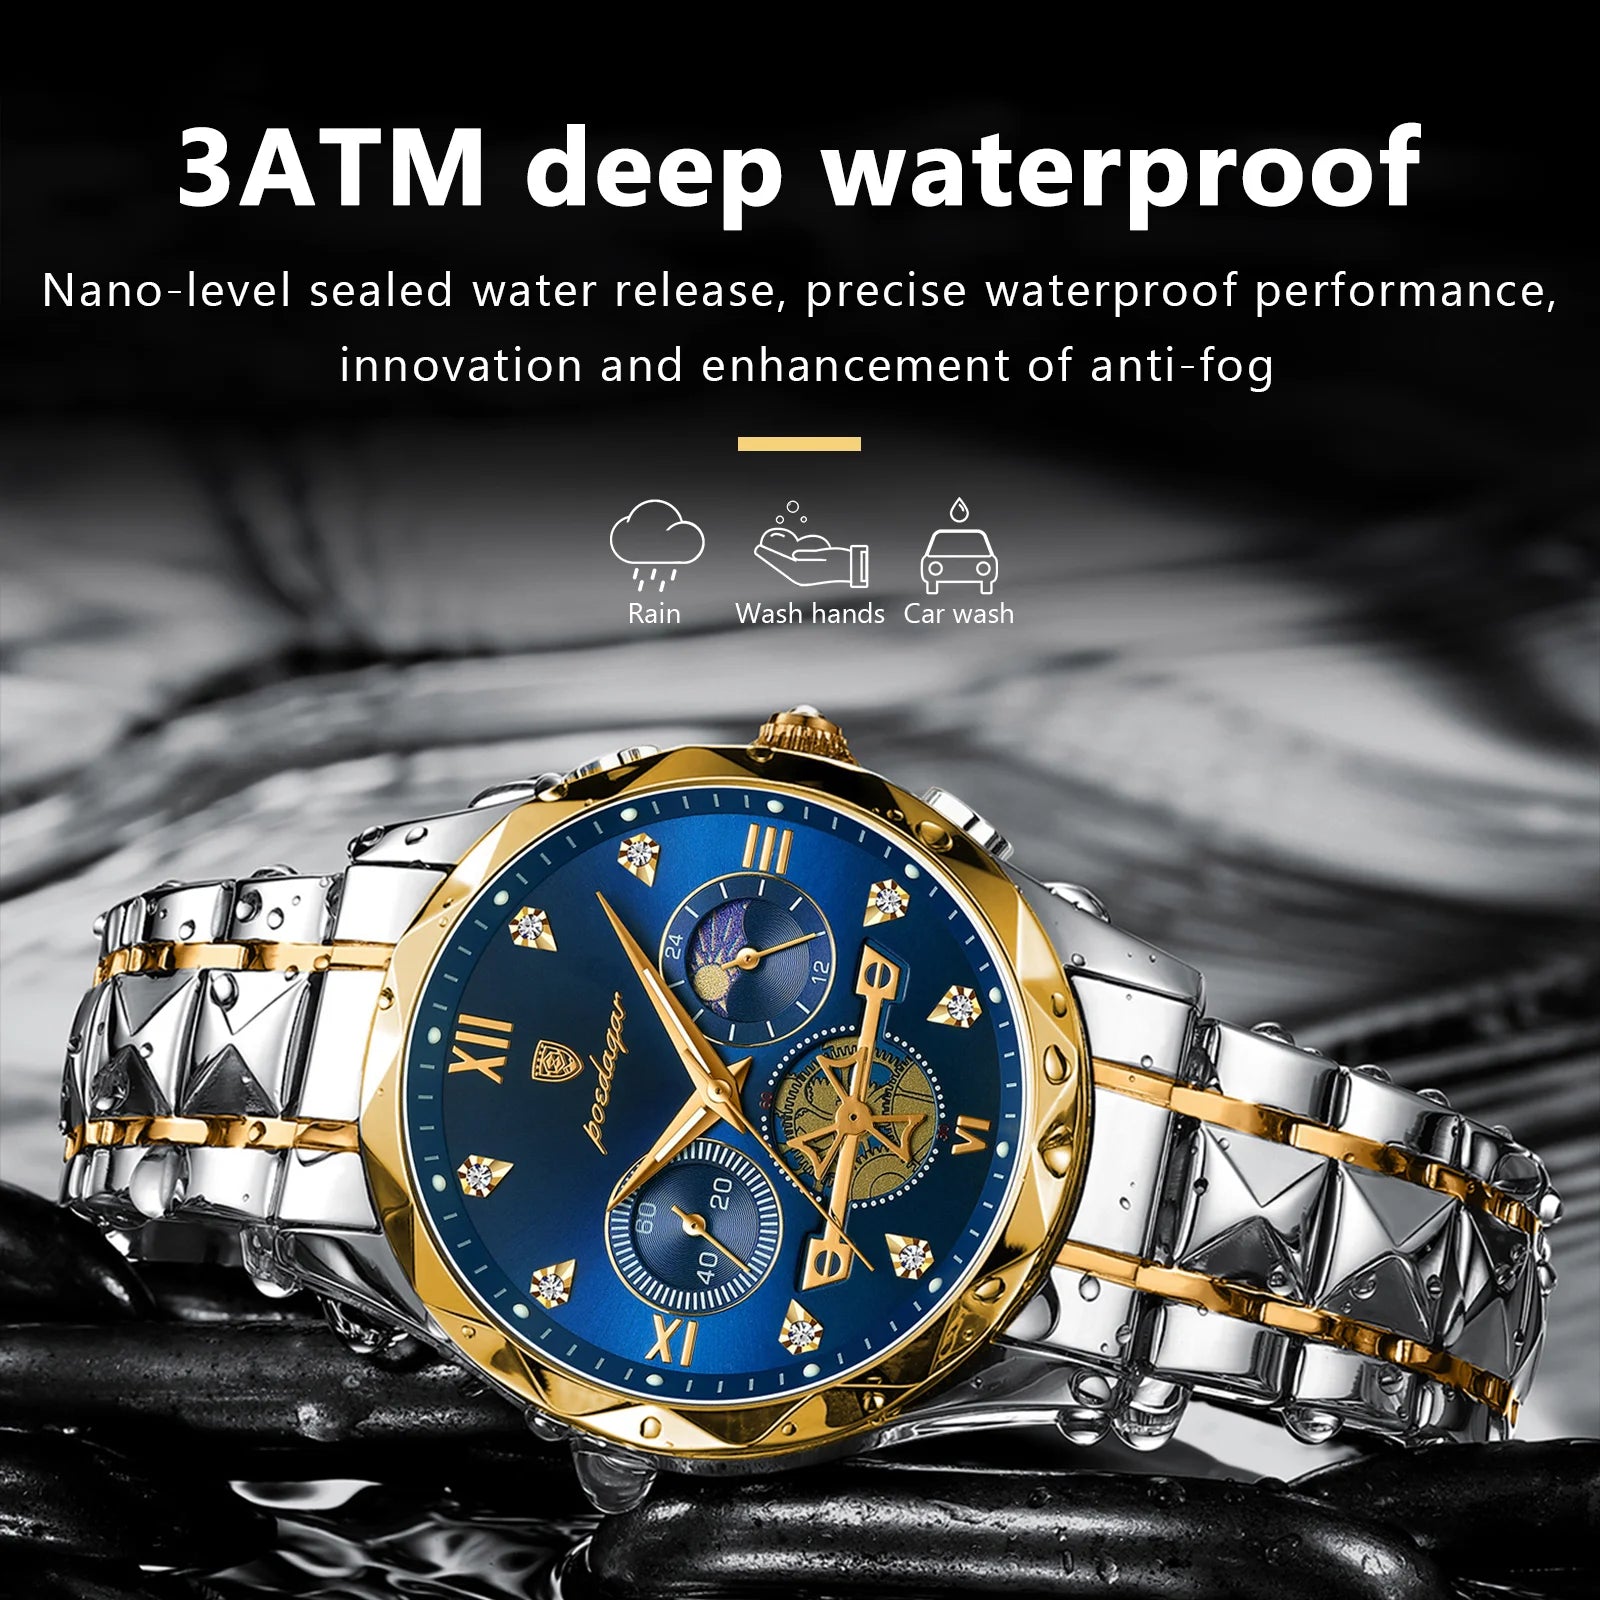 Stylish Stainless Steel Chronograph Watch for Men: Precision Timekeeping & Water Resistance